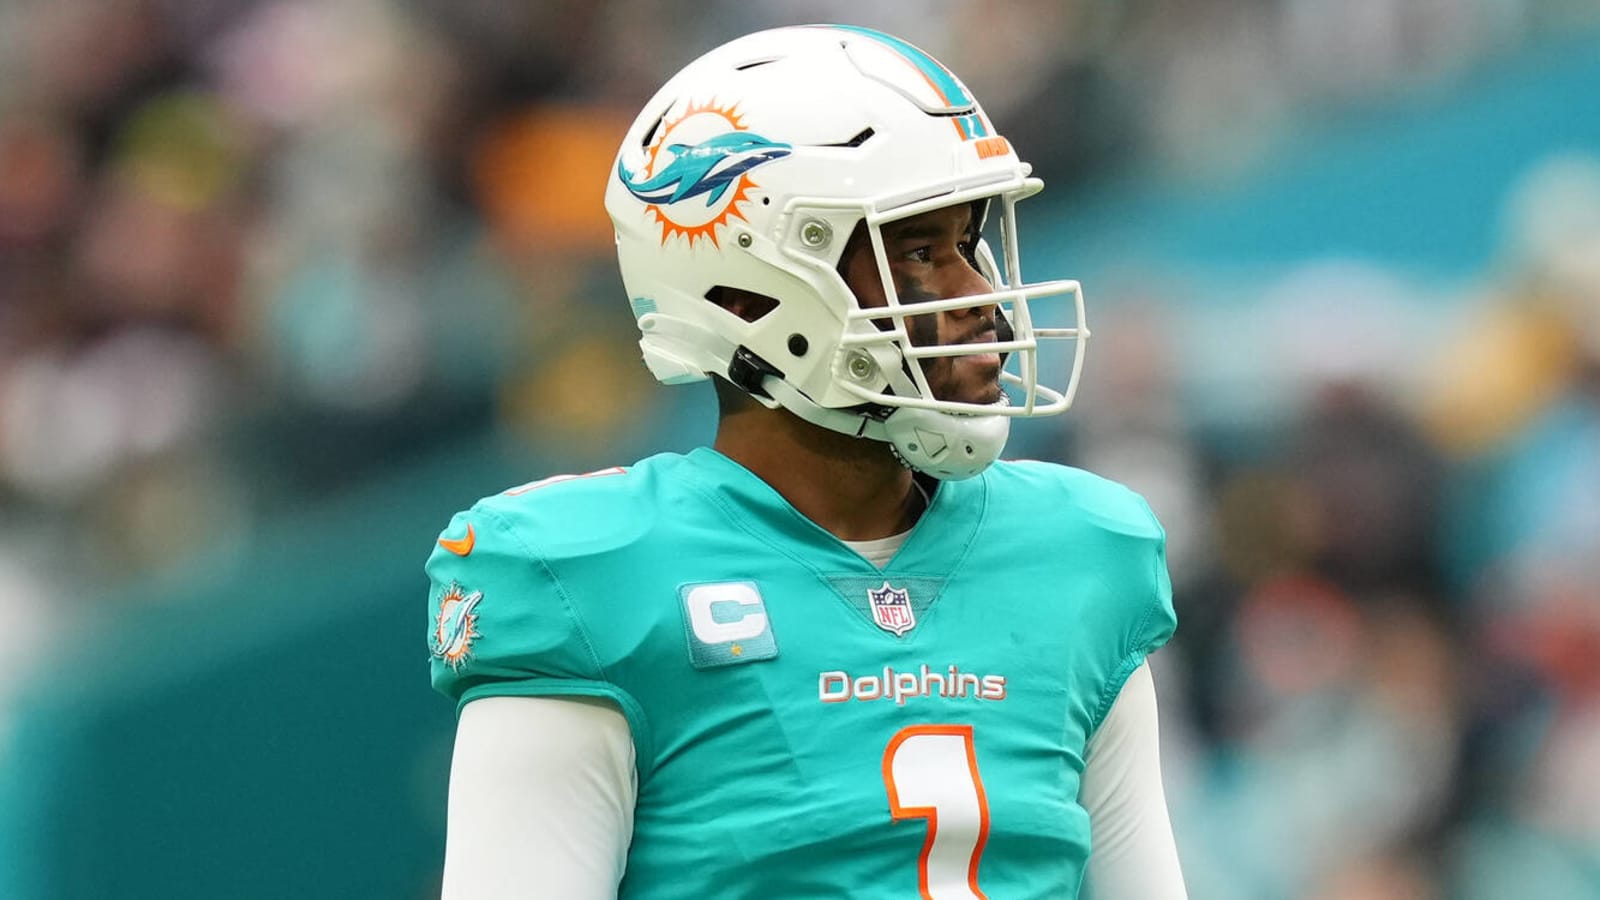 Stephen A. Smith blasts NFL, Dolphins